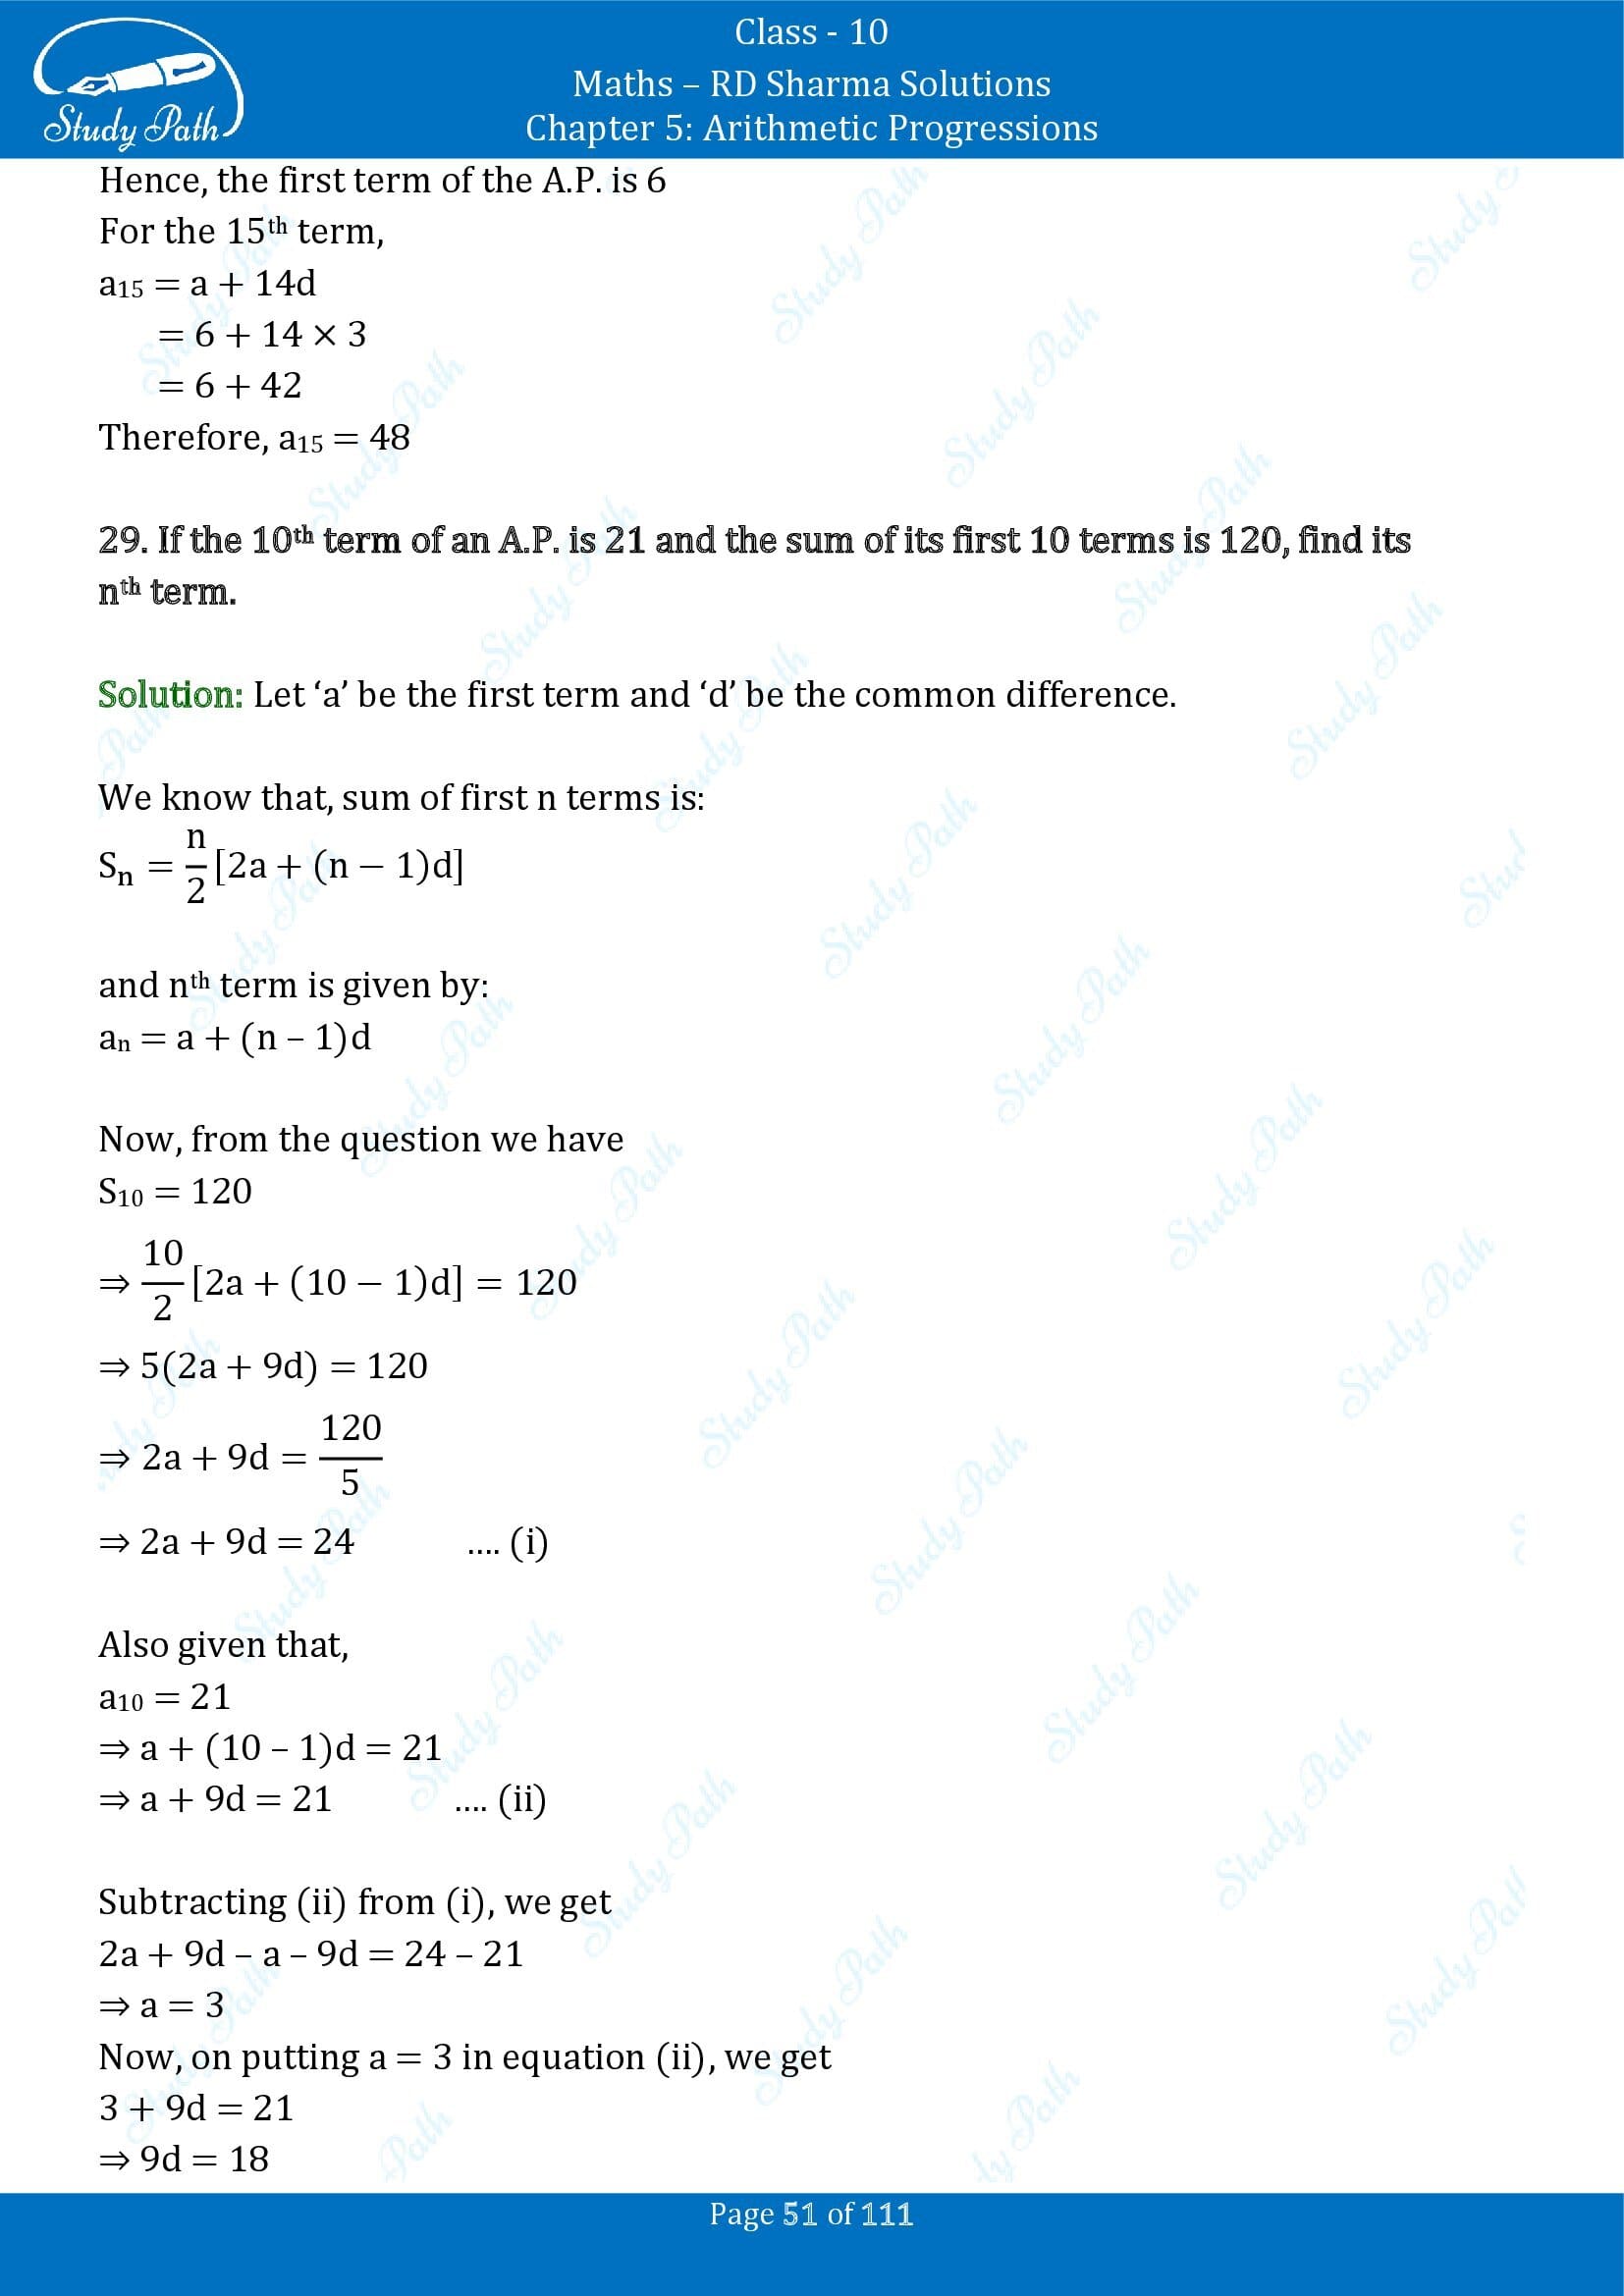 RD Sharma Solutions Class 10 Chapter 5 Arithmetic Progressions Exercise 5.6 00051